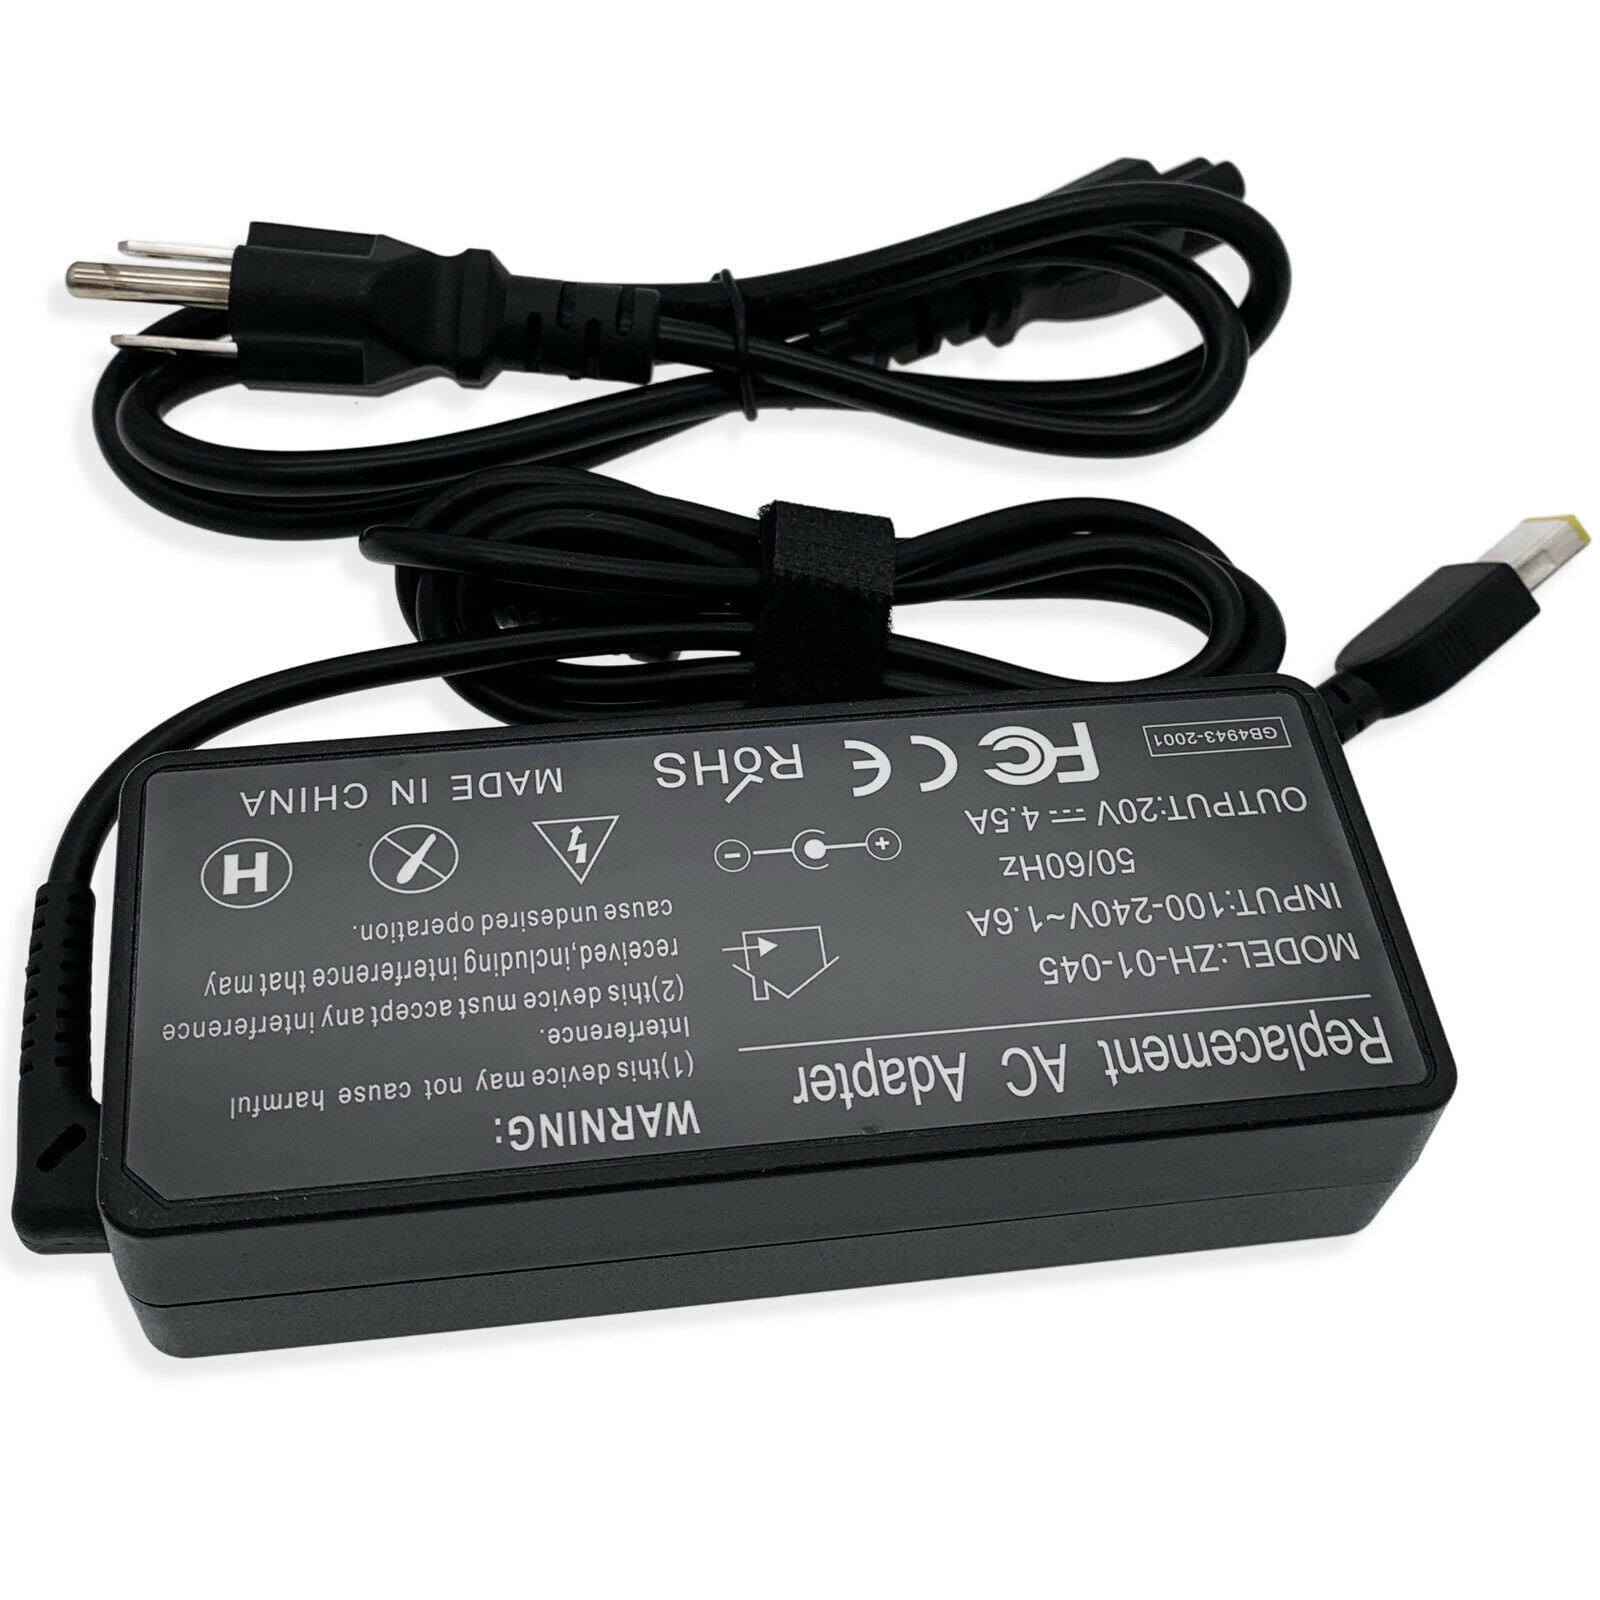 verkoper Enzovoorts toetje New For Lenovo 90W 20V Y40 All Models Y40-70 Y40-80 Y50-70 AC Adapter  Charger - Walmart.com